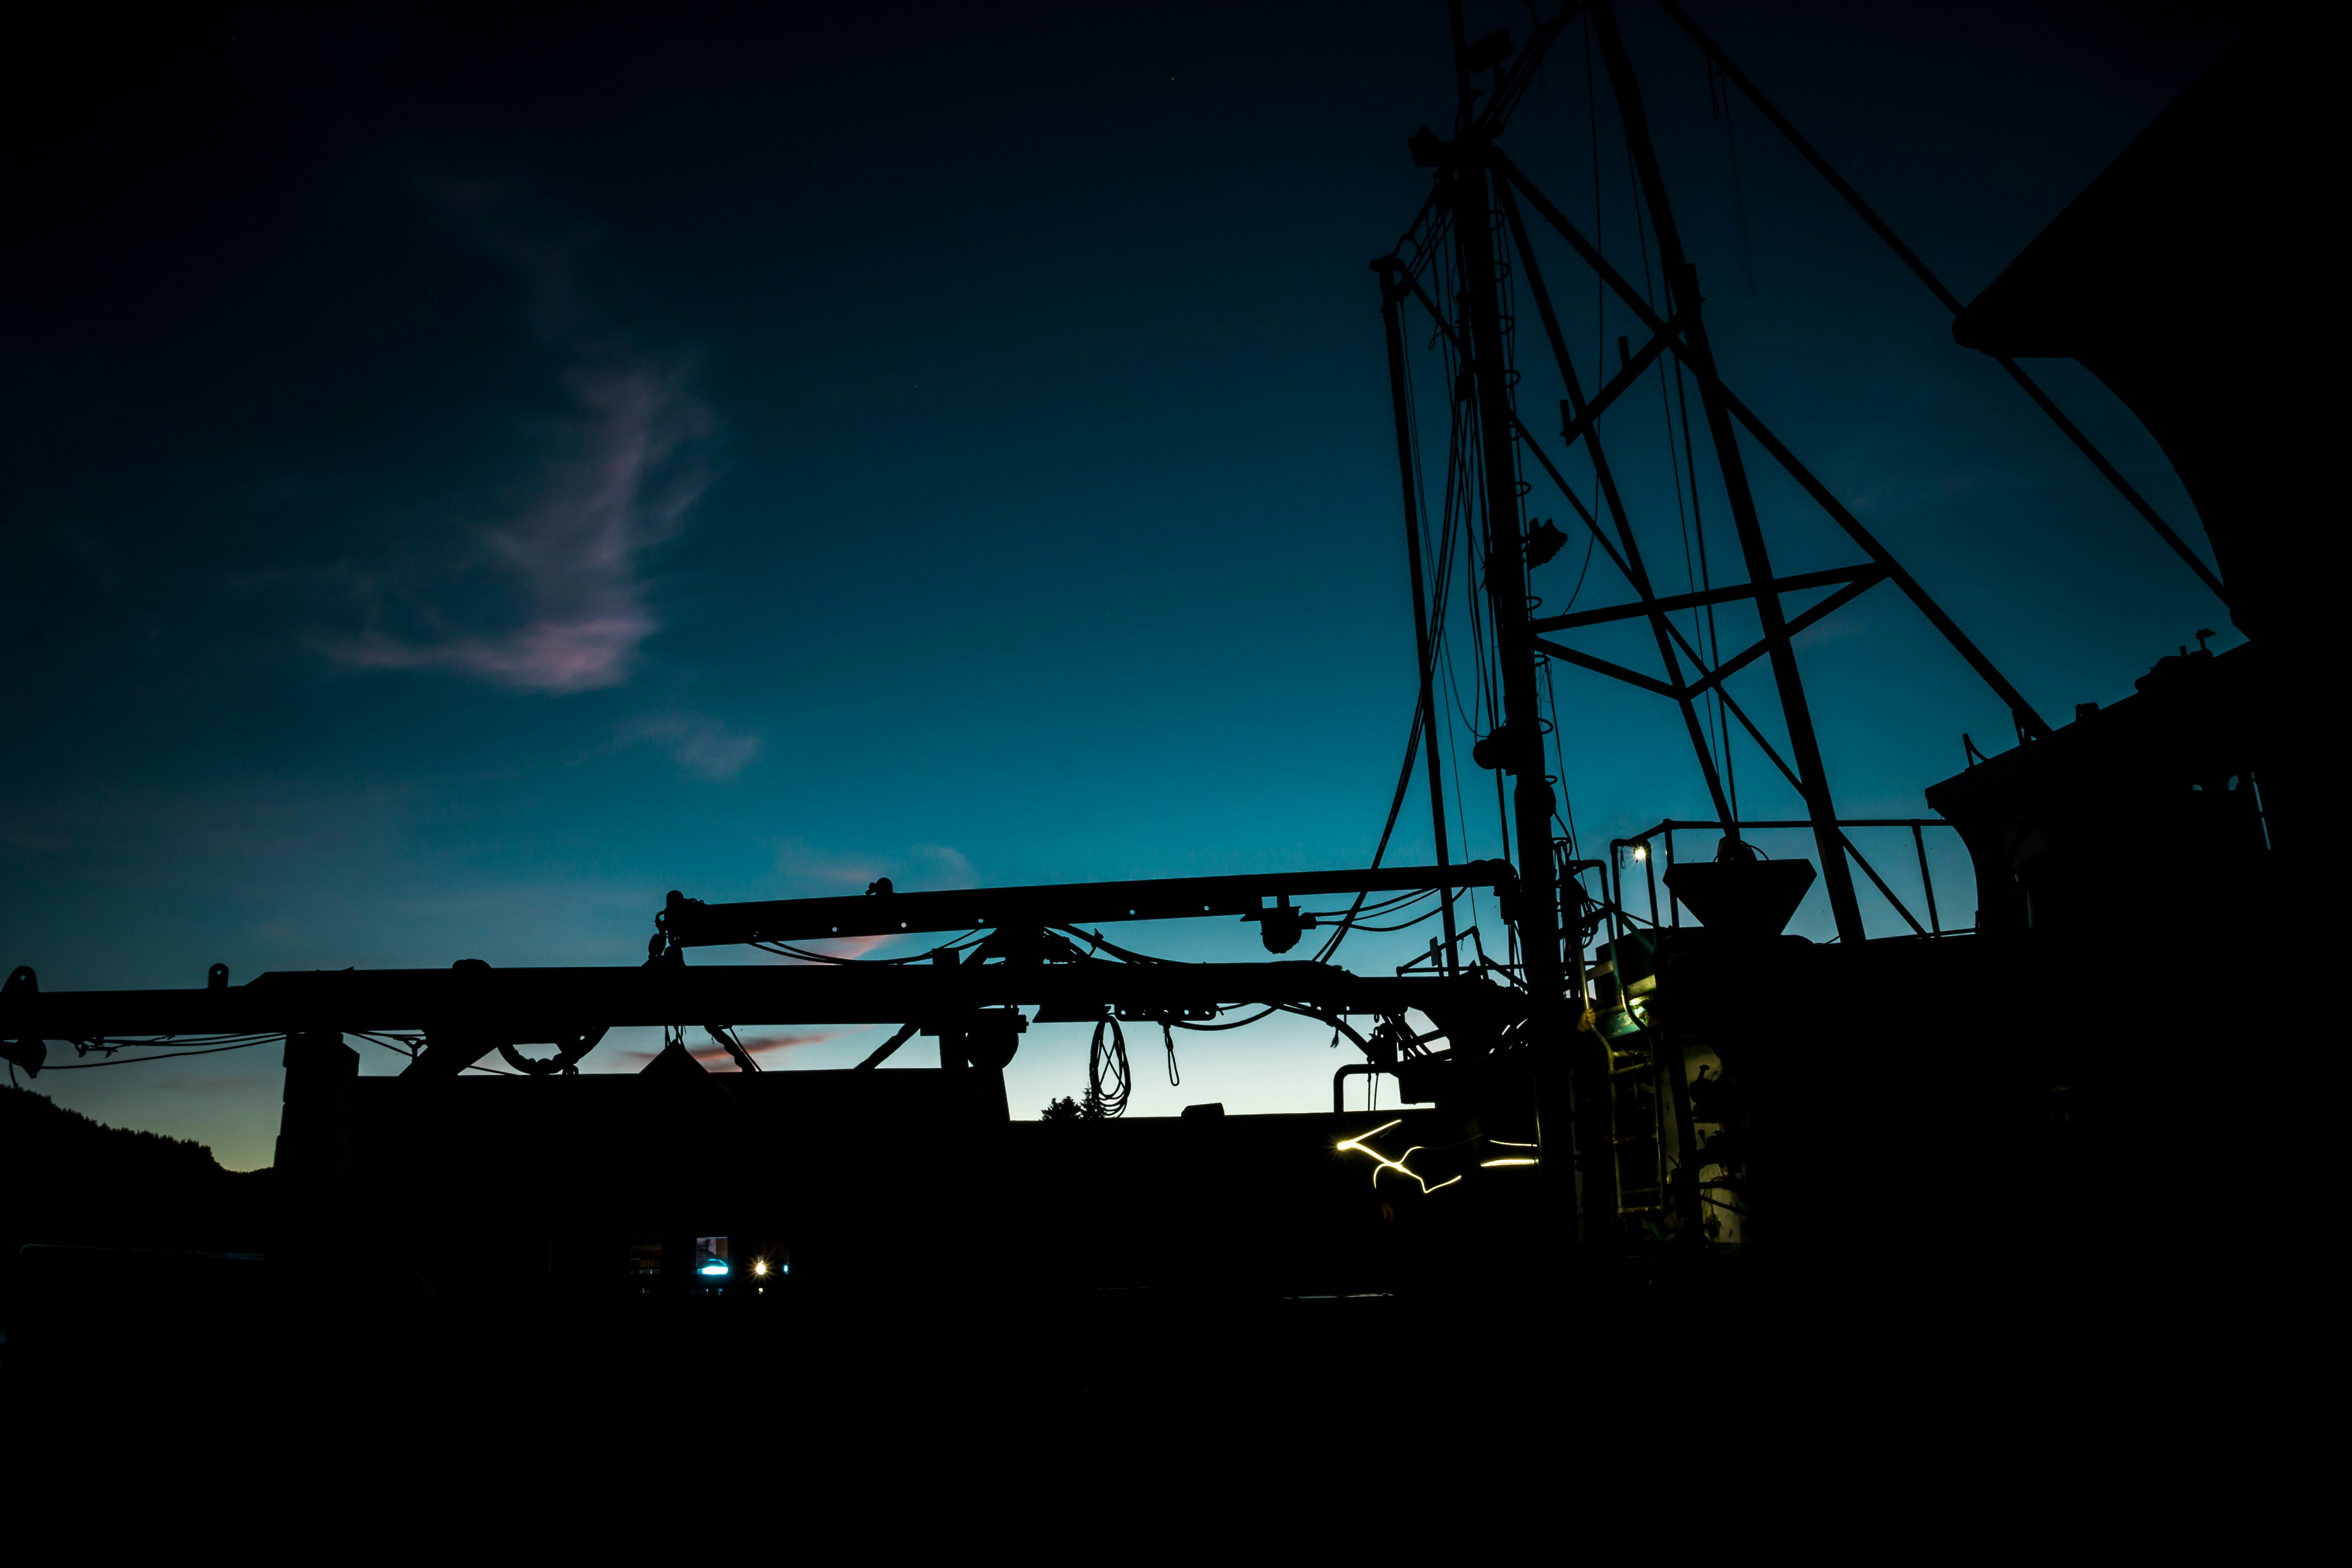 The silhouette of equipment on a boat at dusk in Hoonah